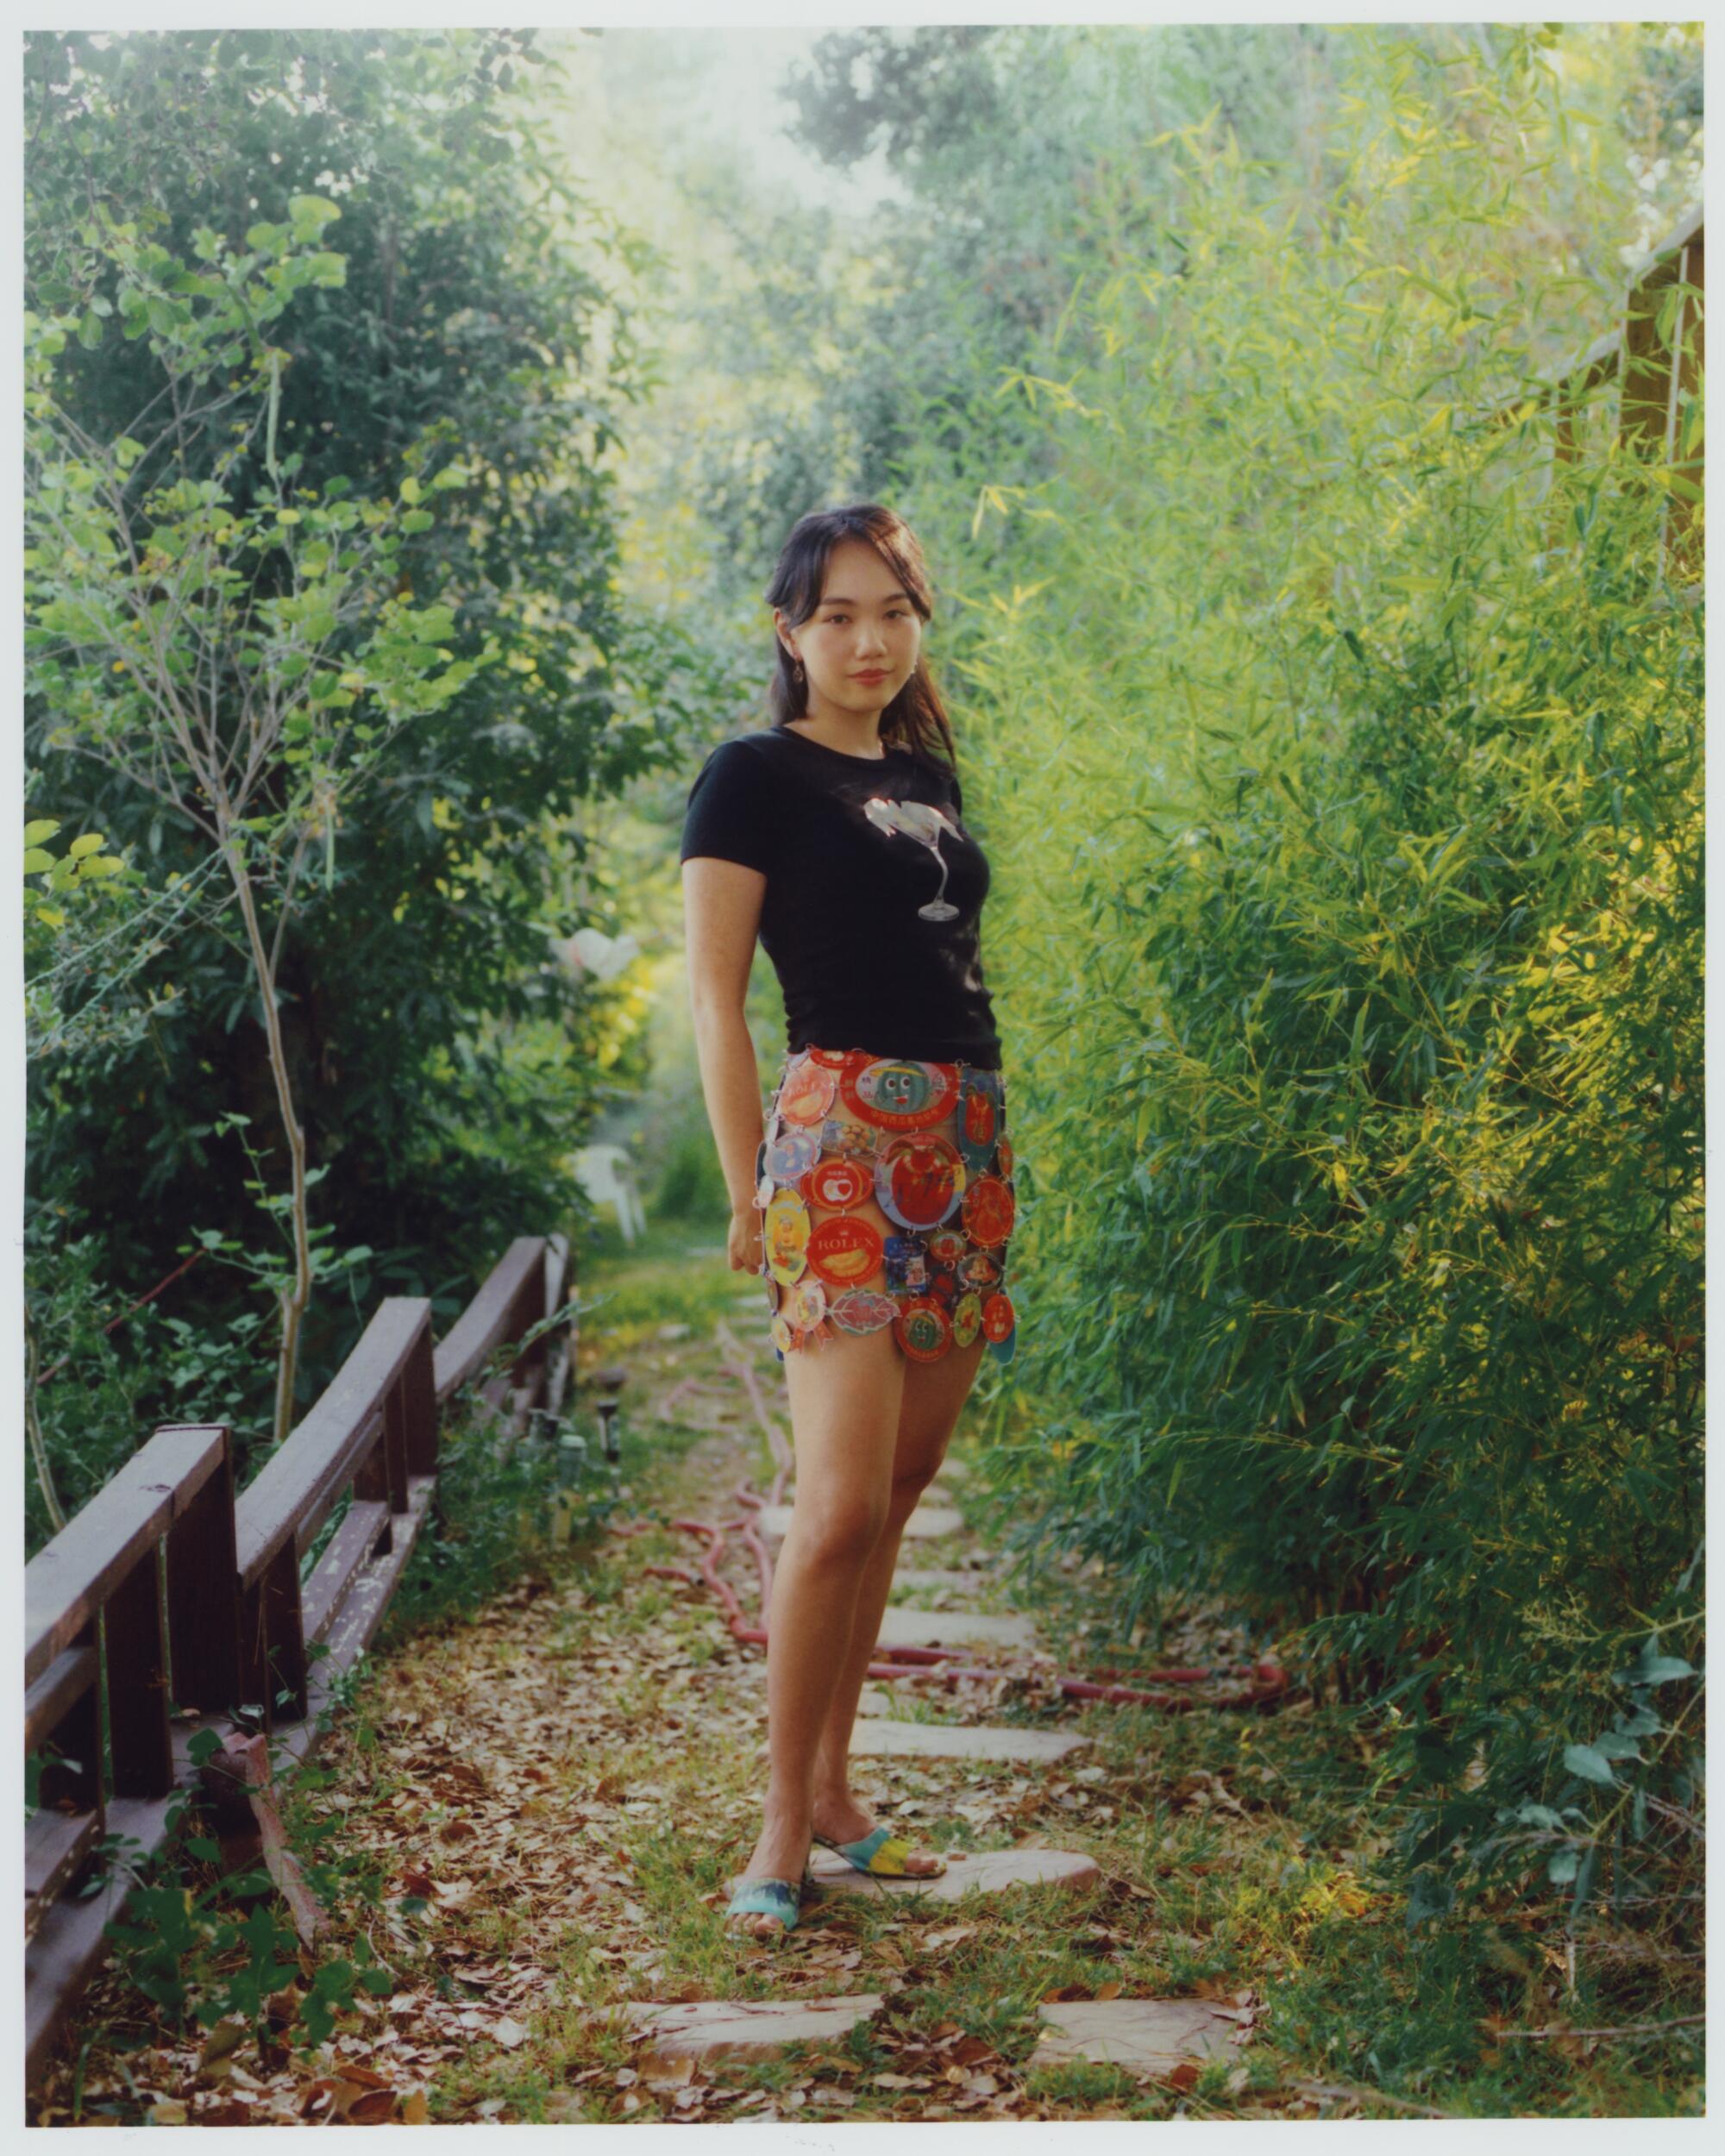 Leeann wears Leeann Huang Shrimp Cocktail Baby Tee, Fruit Sticker Chain Link Skirt, and Landscape Strappy Mules